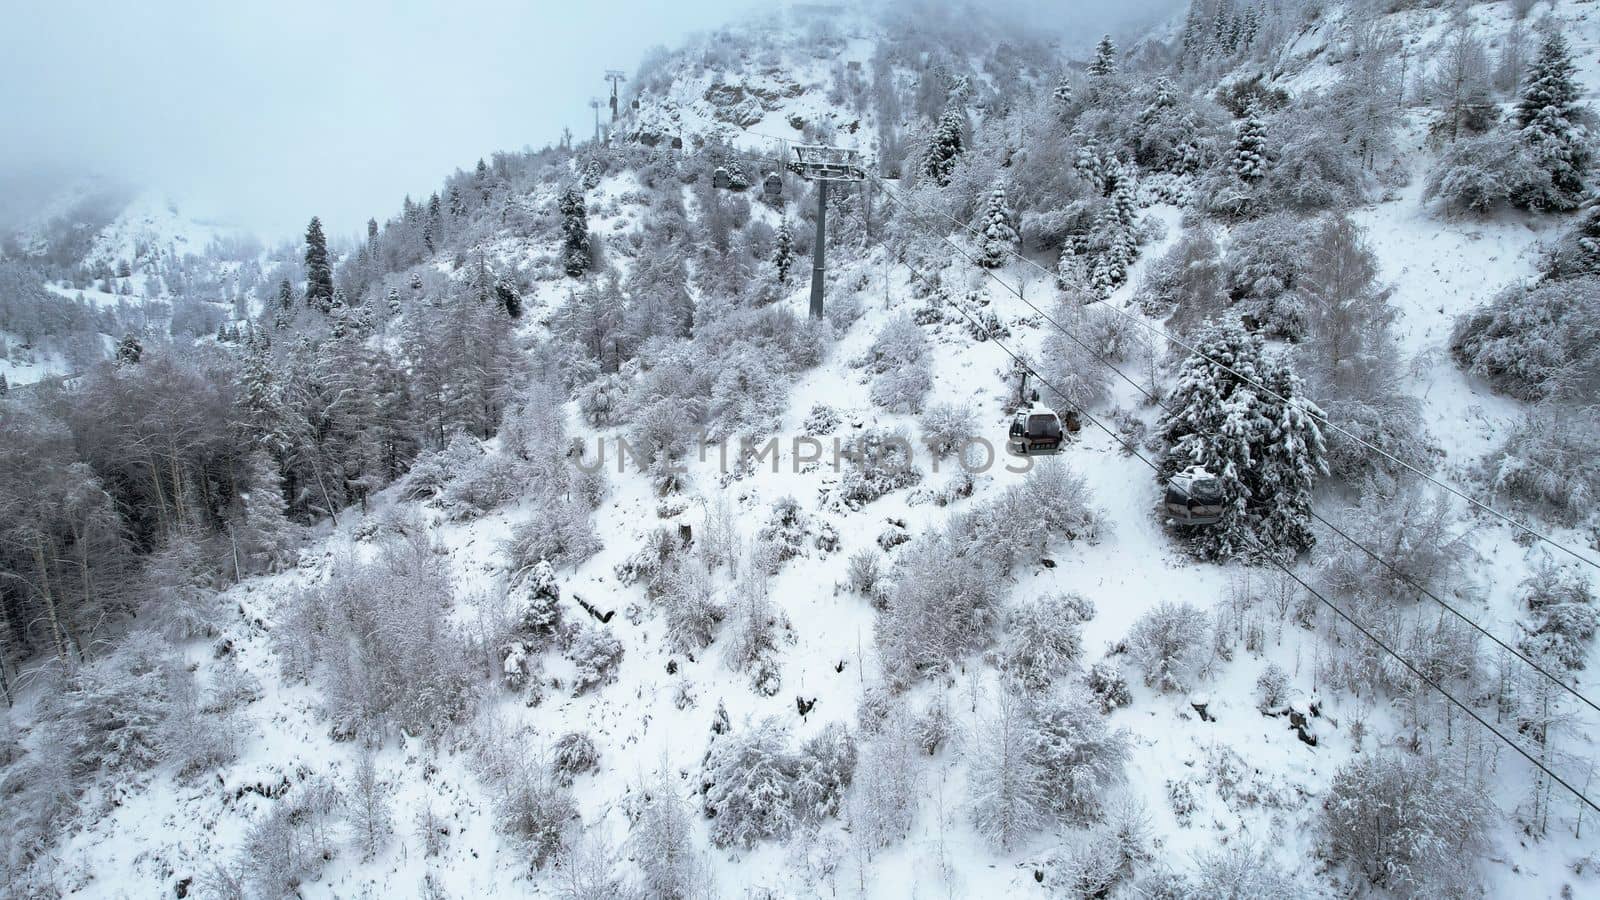 Cable car in the mountains in the winter forest. The cabins move along the gondola road through the winter snow forest and fog. White clouds covered the mountains. Top view from a drone. Medeo, Almaty